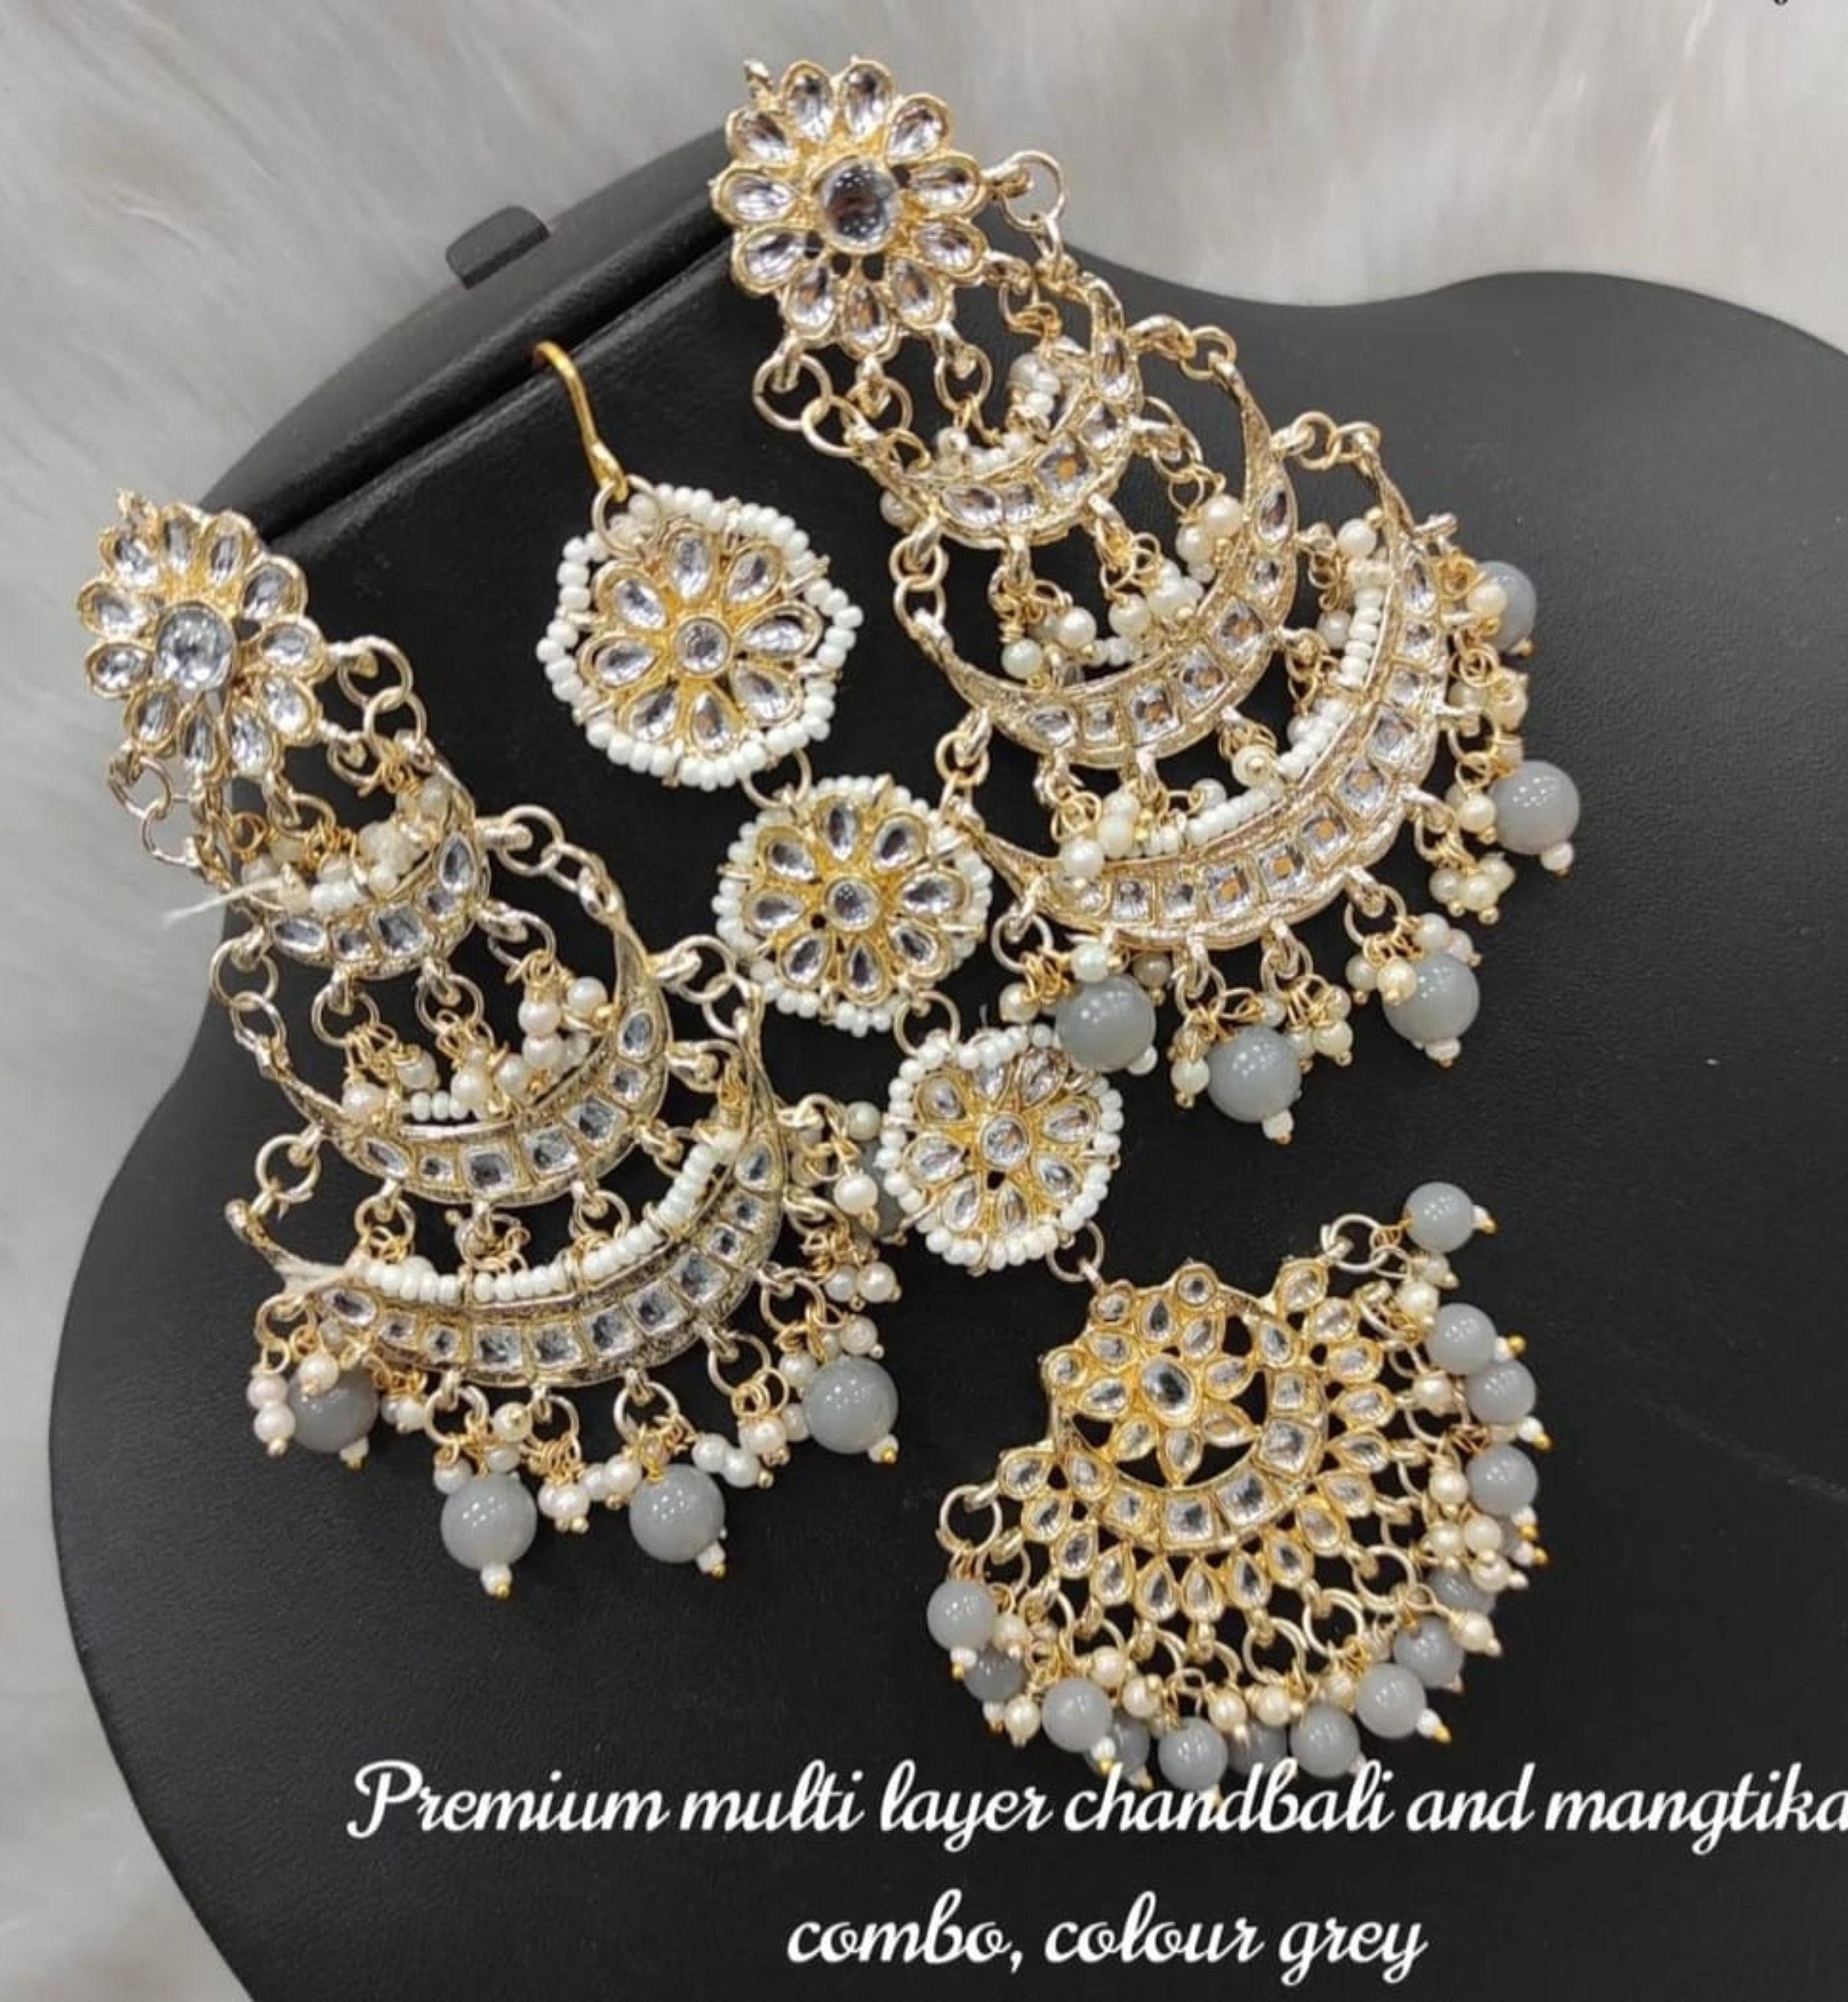 Kamal Johar Grey Color Pearls Necklace with Earrings & Tikka Mangalsutra  Jkms_078 | Necklace set, Necklace, Grey pearl necklace